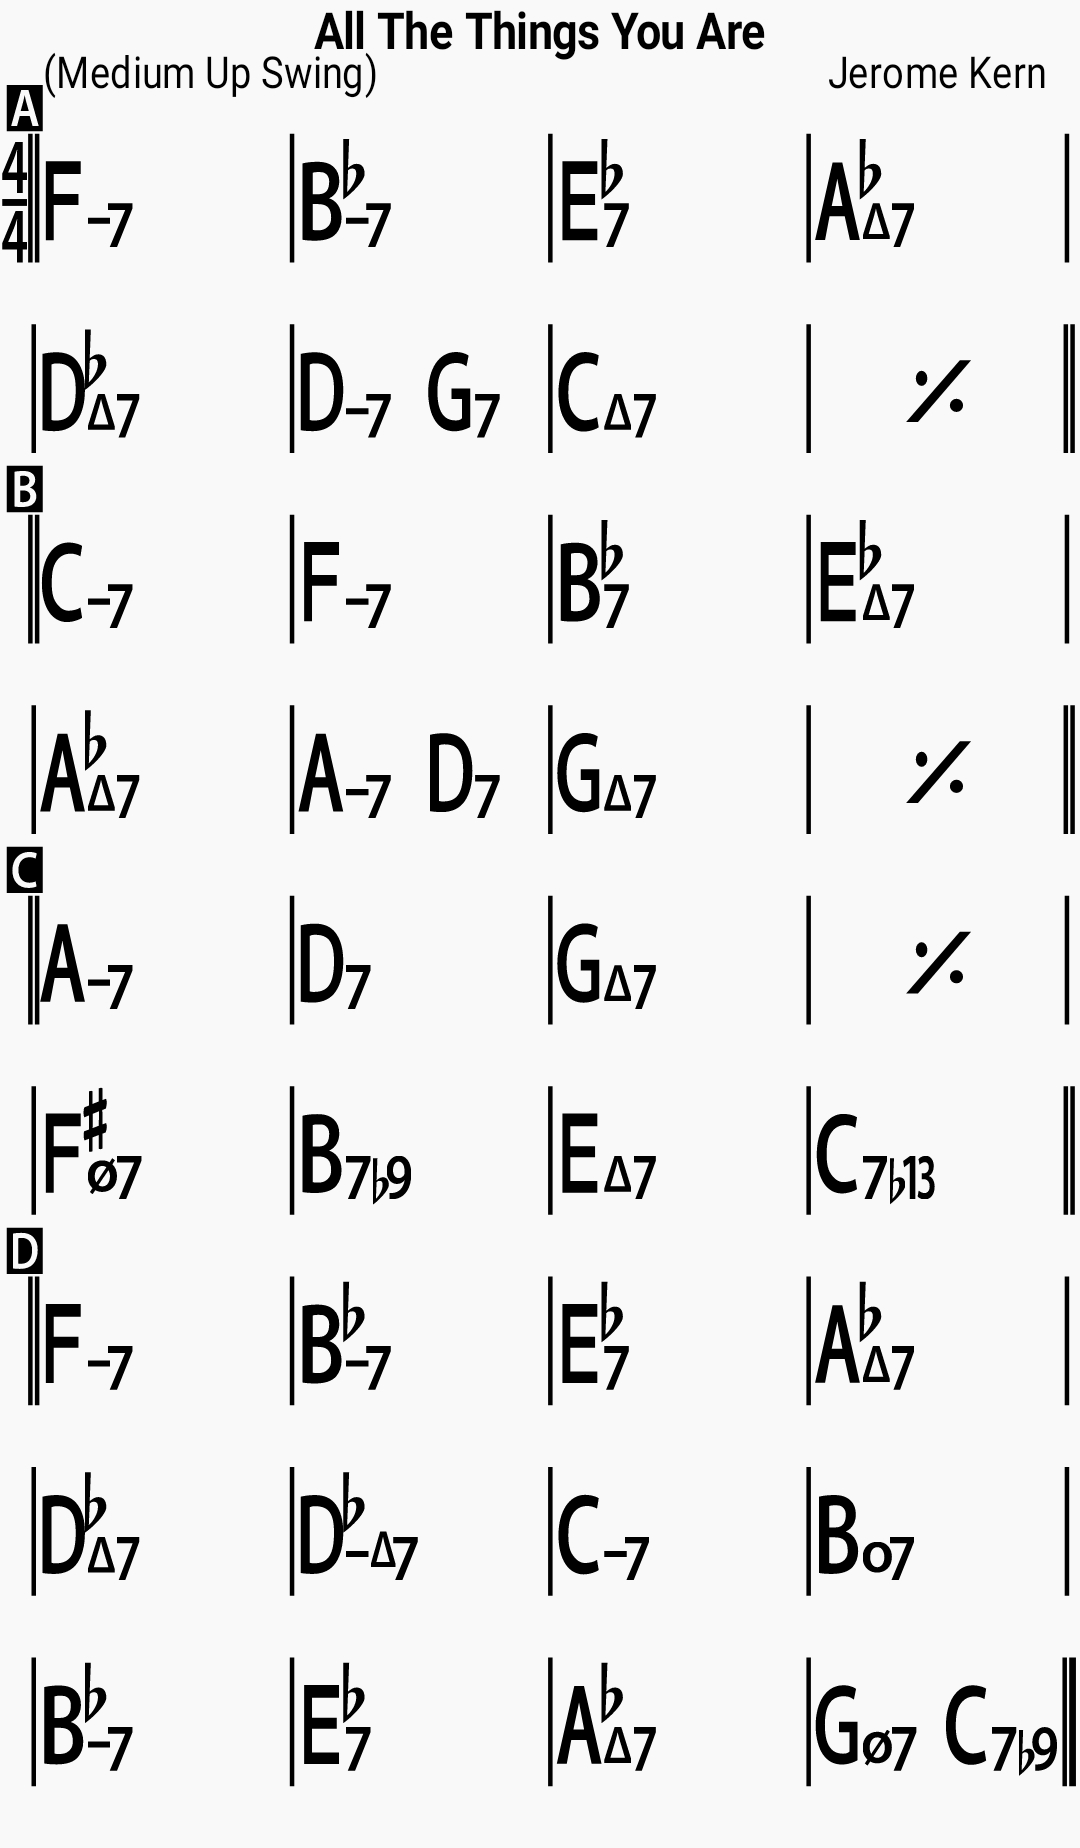 Chord chart for the jazz standard All The Things You Are